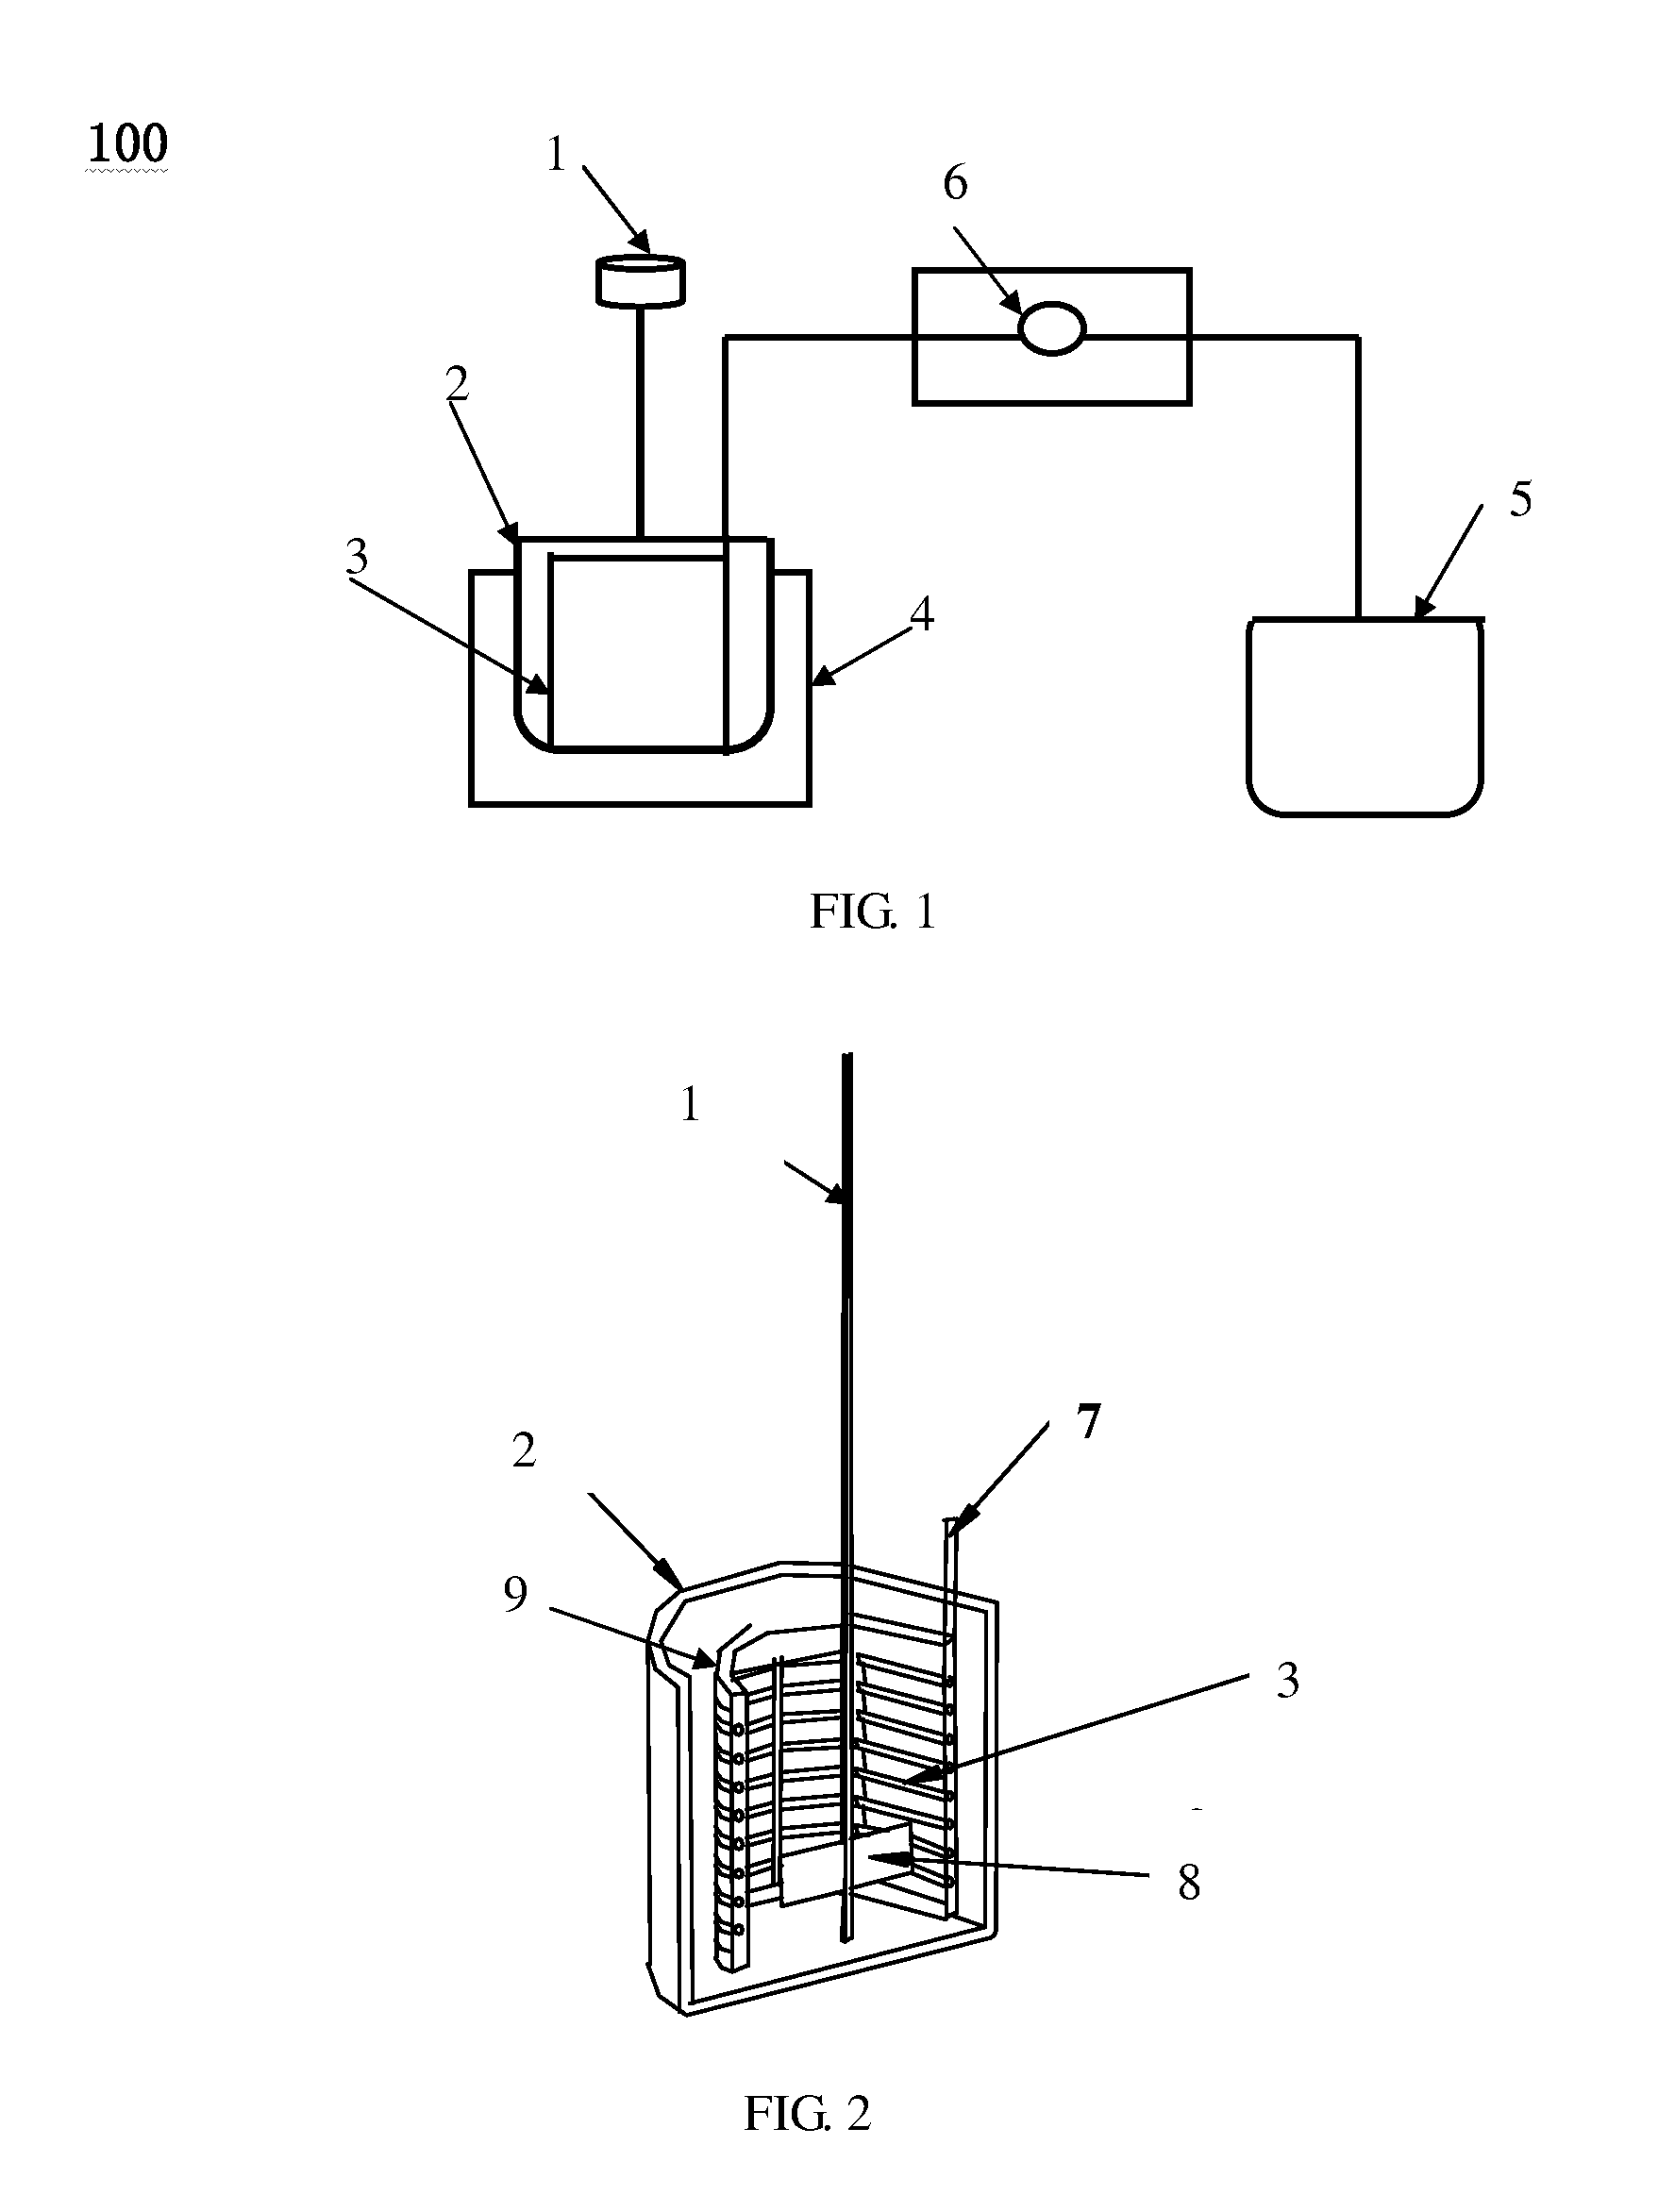 Apparatus and process for metal oxides and metal nanoparticles synthesis